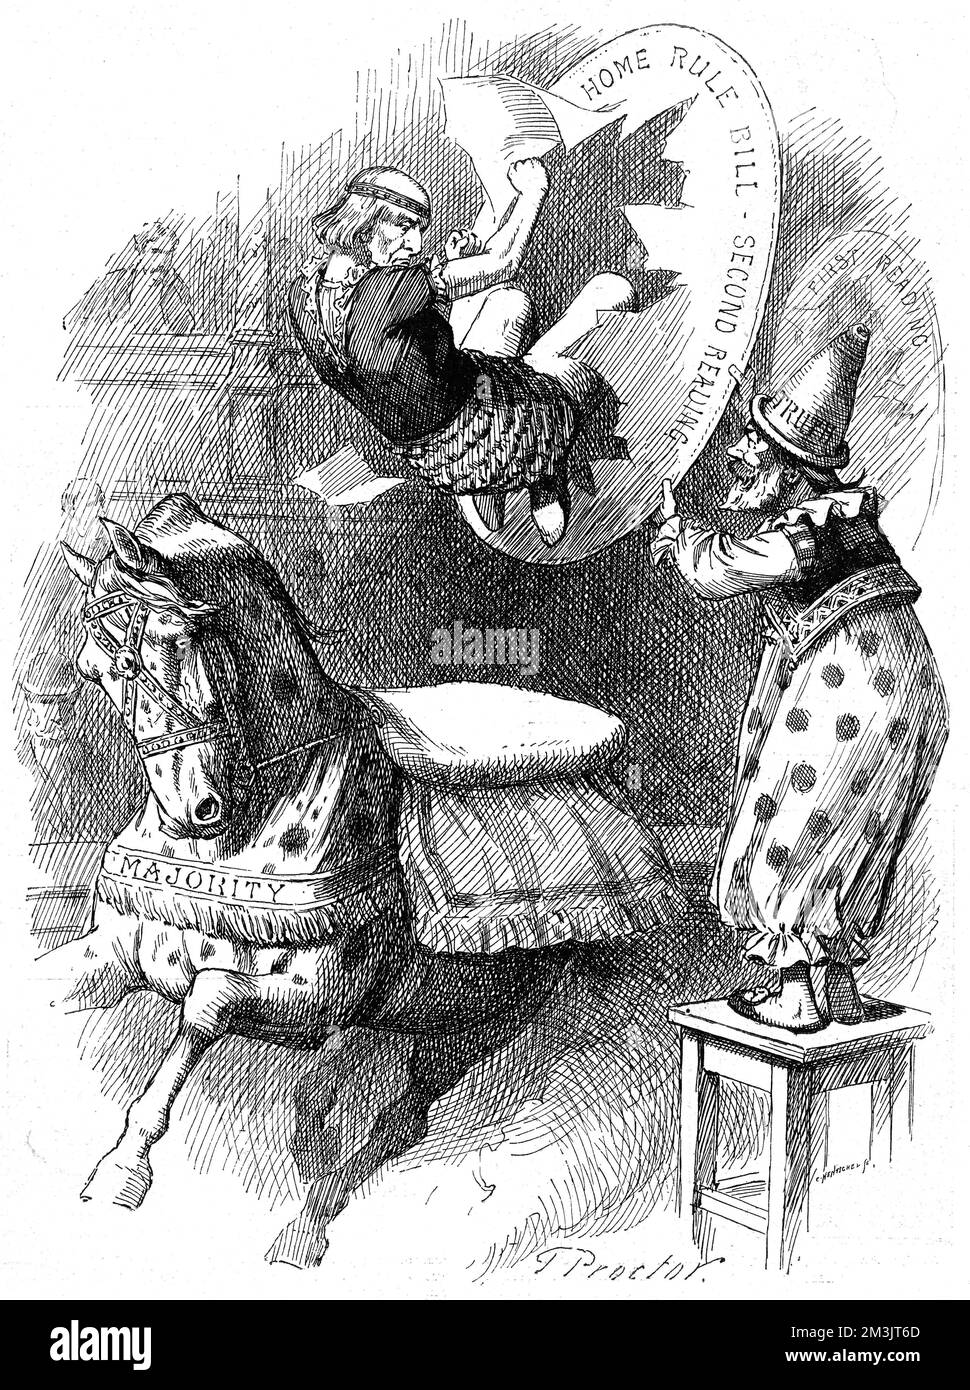 Cartoon from 1893 showing William Gladstone as a circus performer flying through a hoop representing the Home Rule Bill. The Home Rule Bill proposed an Irish Parliament responsible for internal affairs. Both attempts by Gladstone, the first in 1886, the second in 1893, were rejected by the House of Lords. Stock Photo